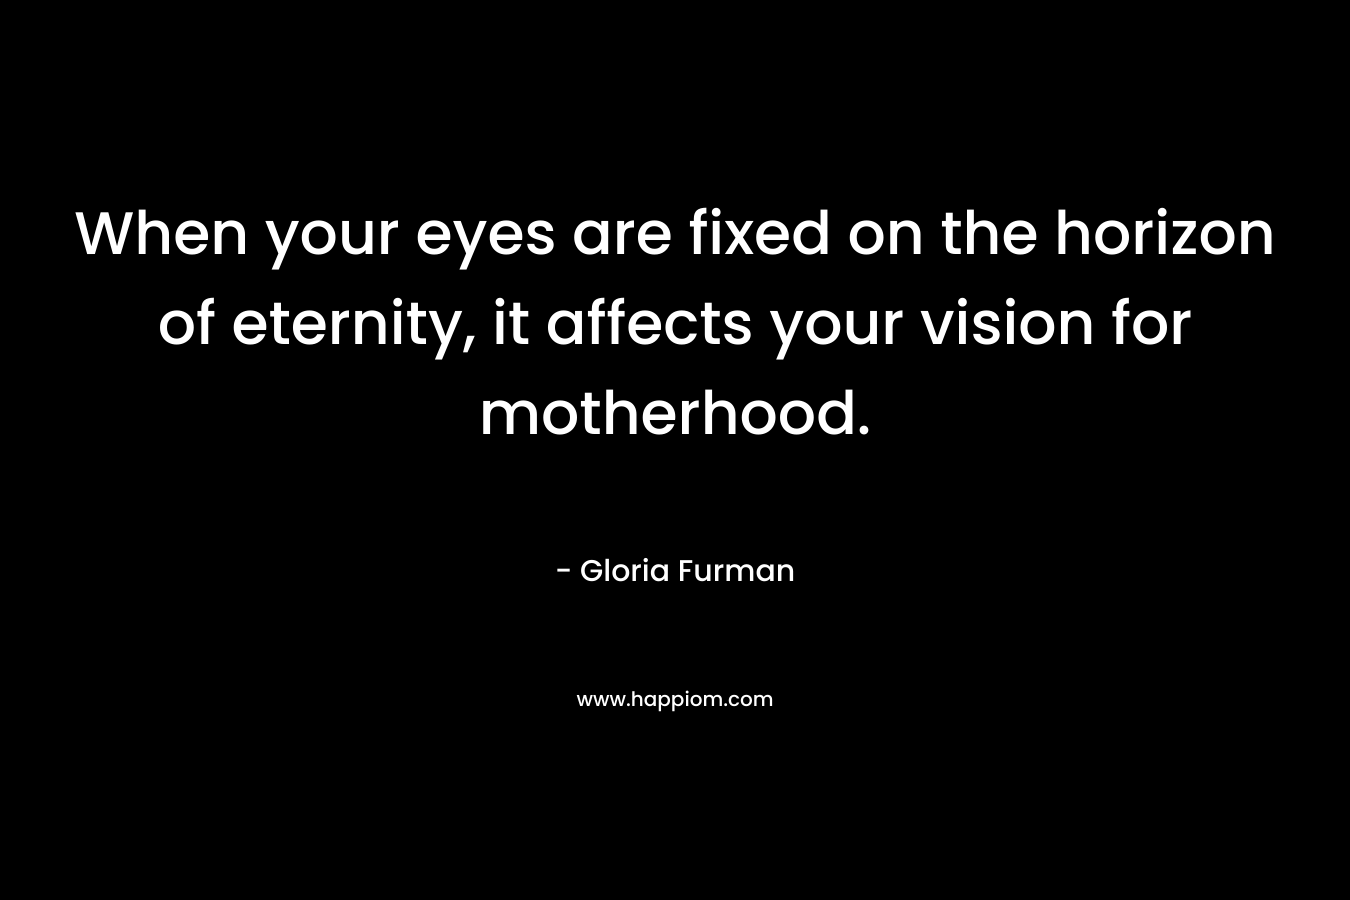 When your eyes are fixed on the horizon of eternity, it affects your vision for motherhood.